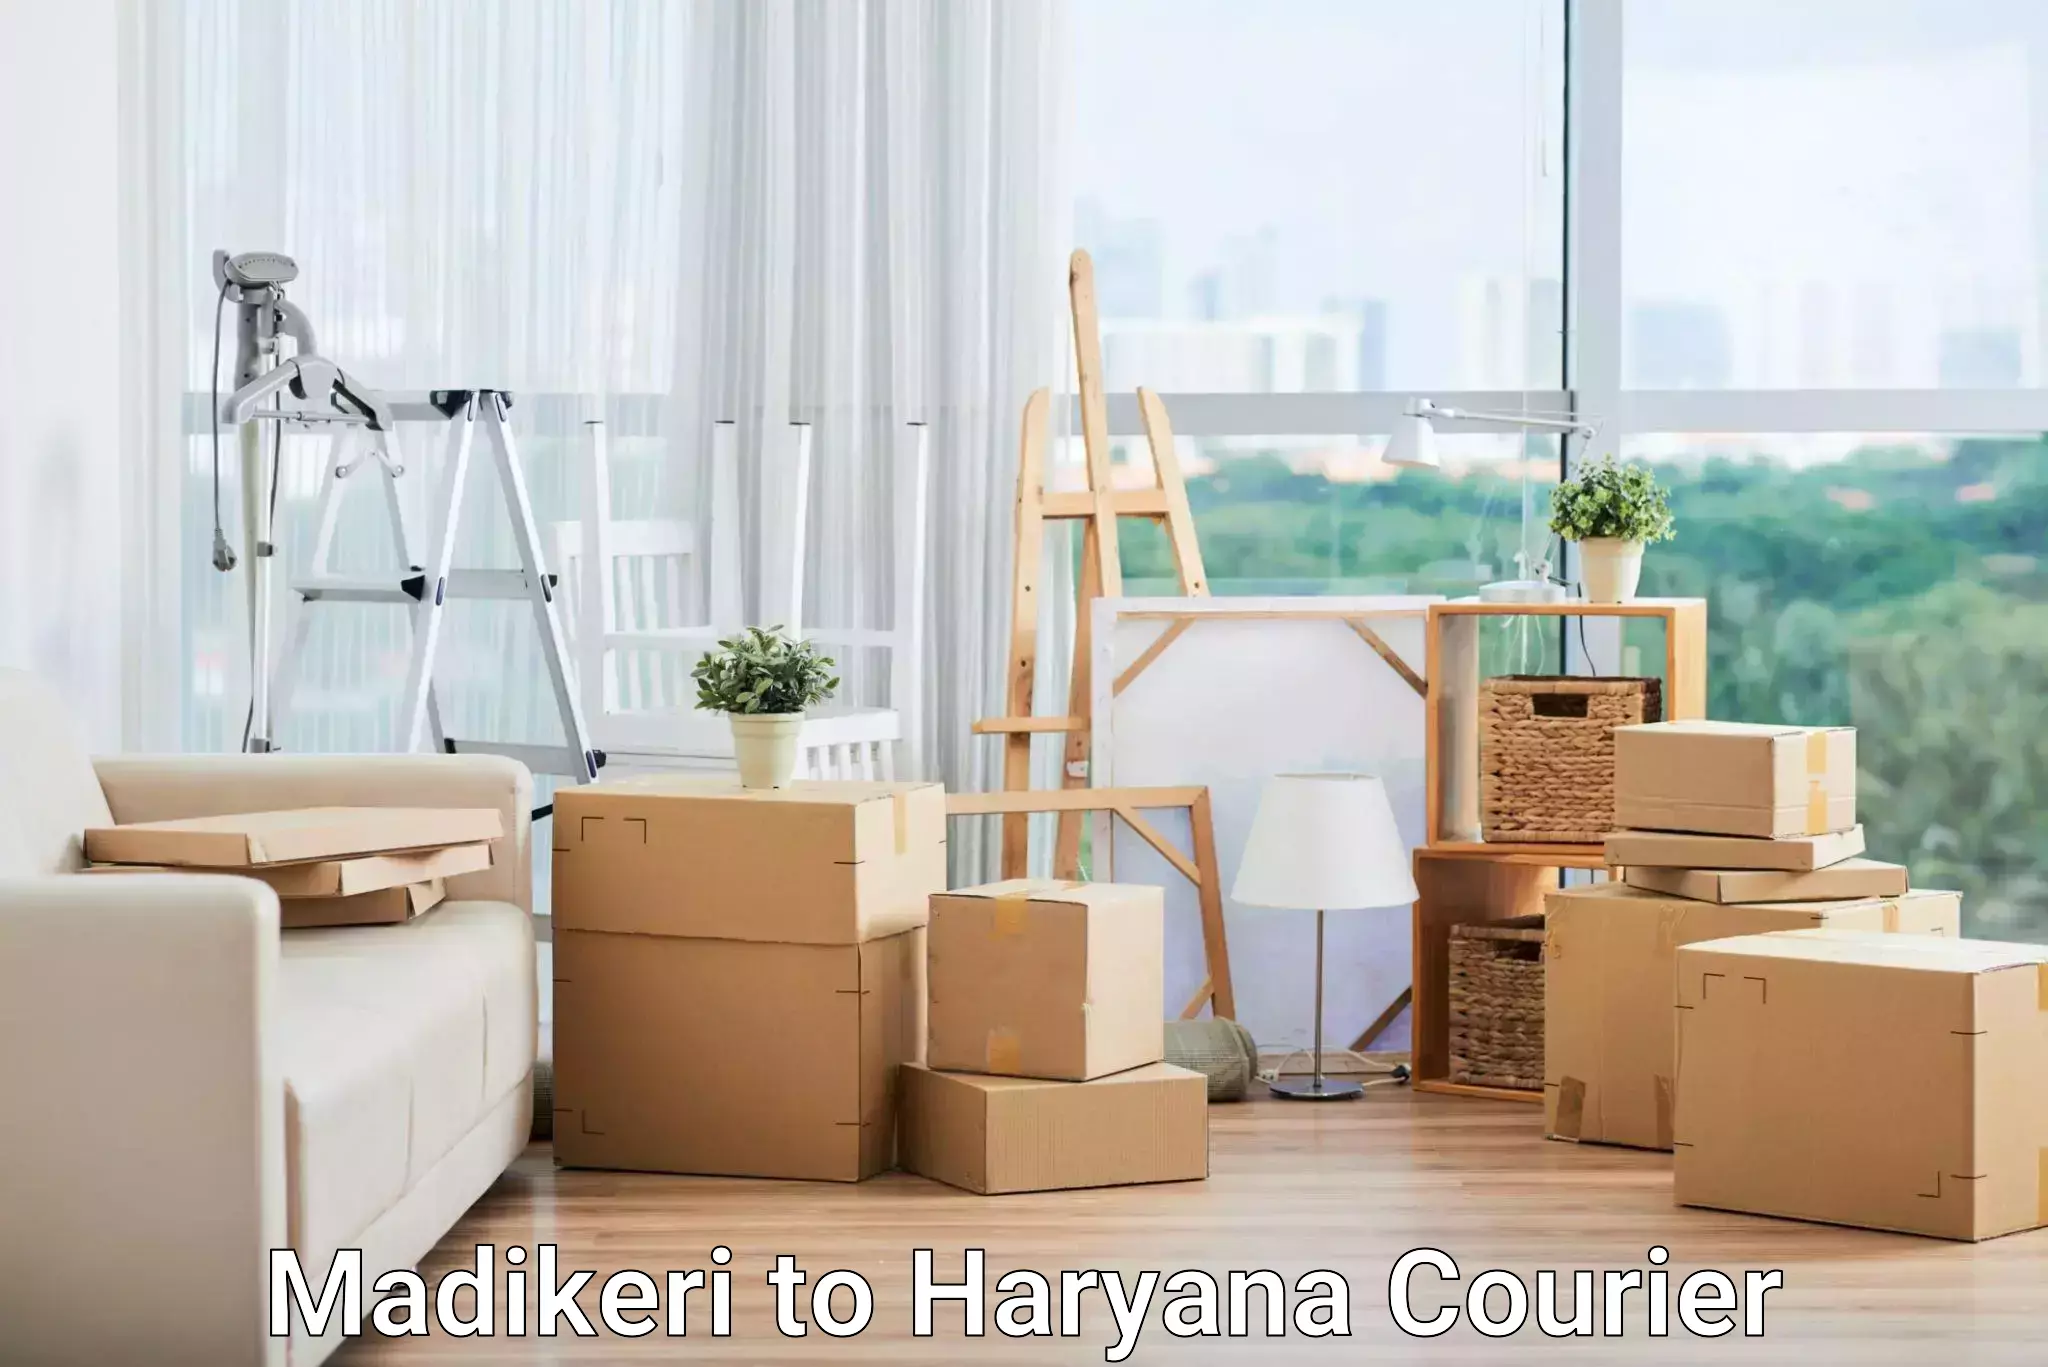 24-hour courier services Madikeri to Chaudhary Charan Singh Haryana Agricultural University Hisar